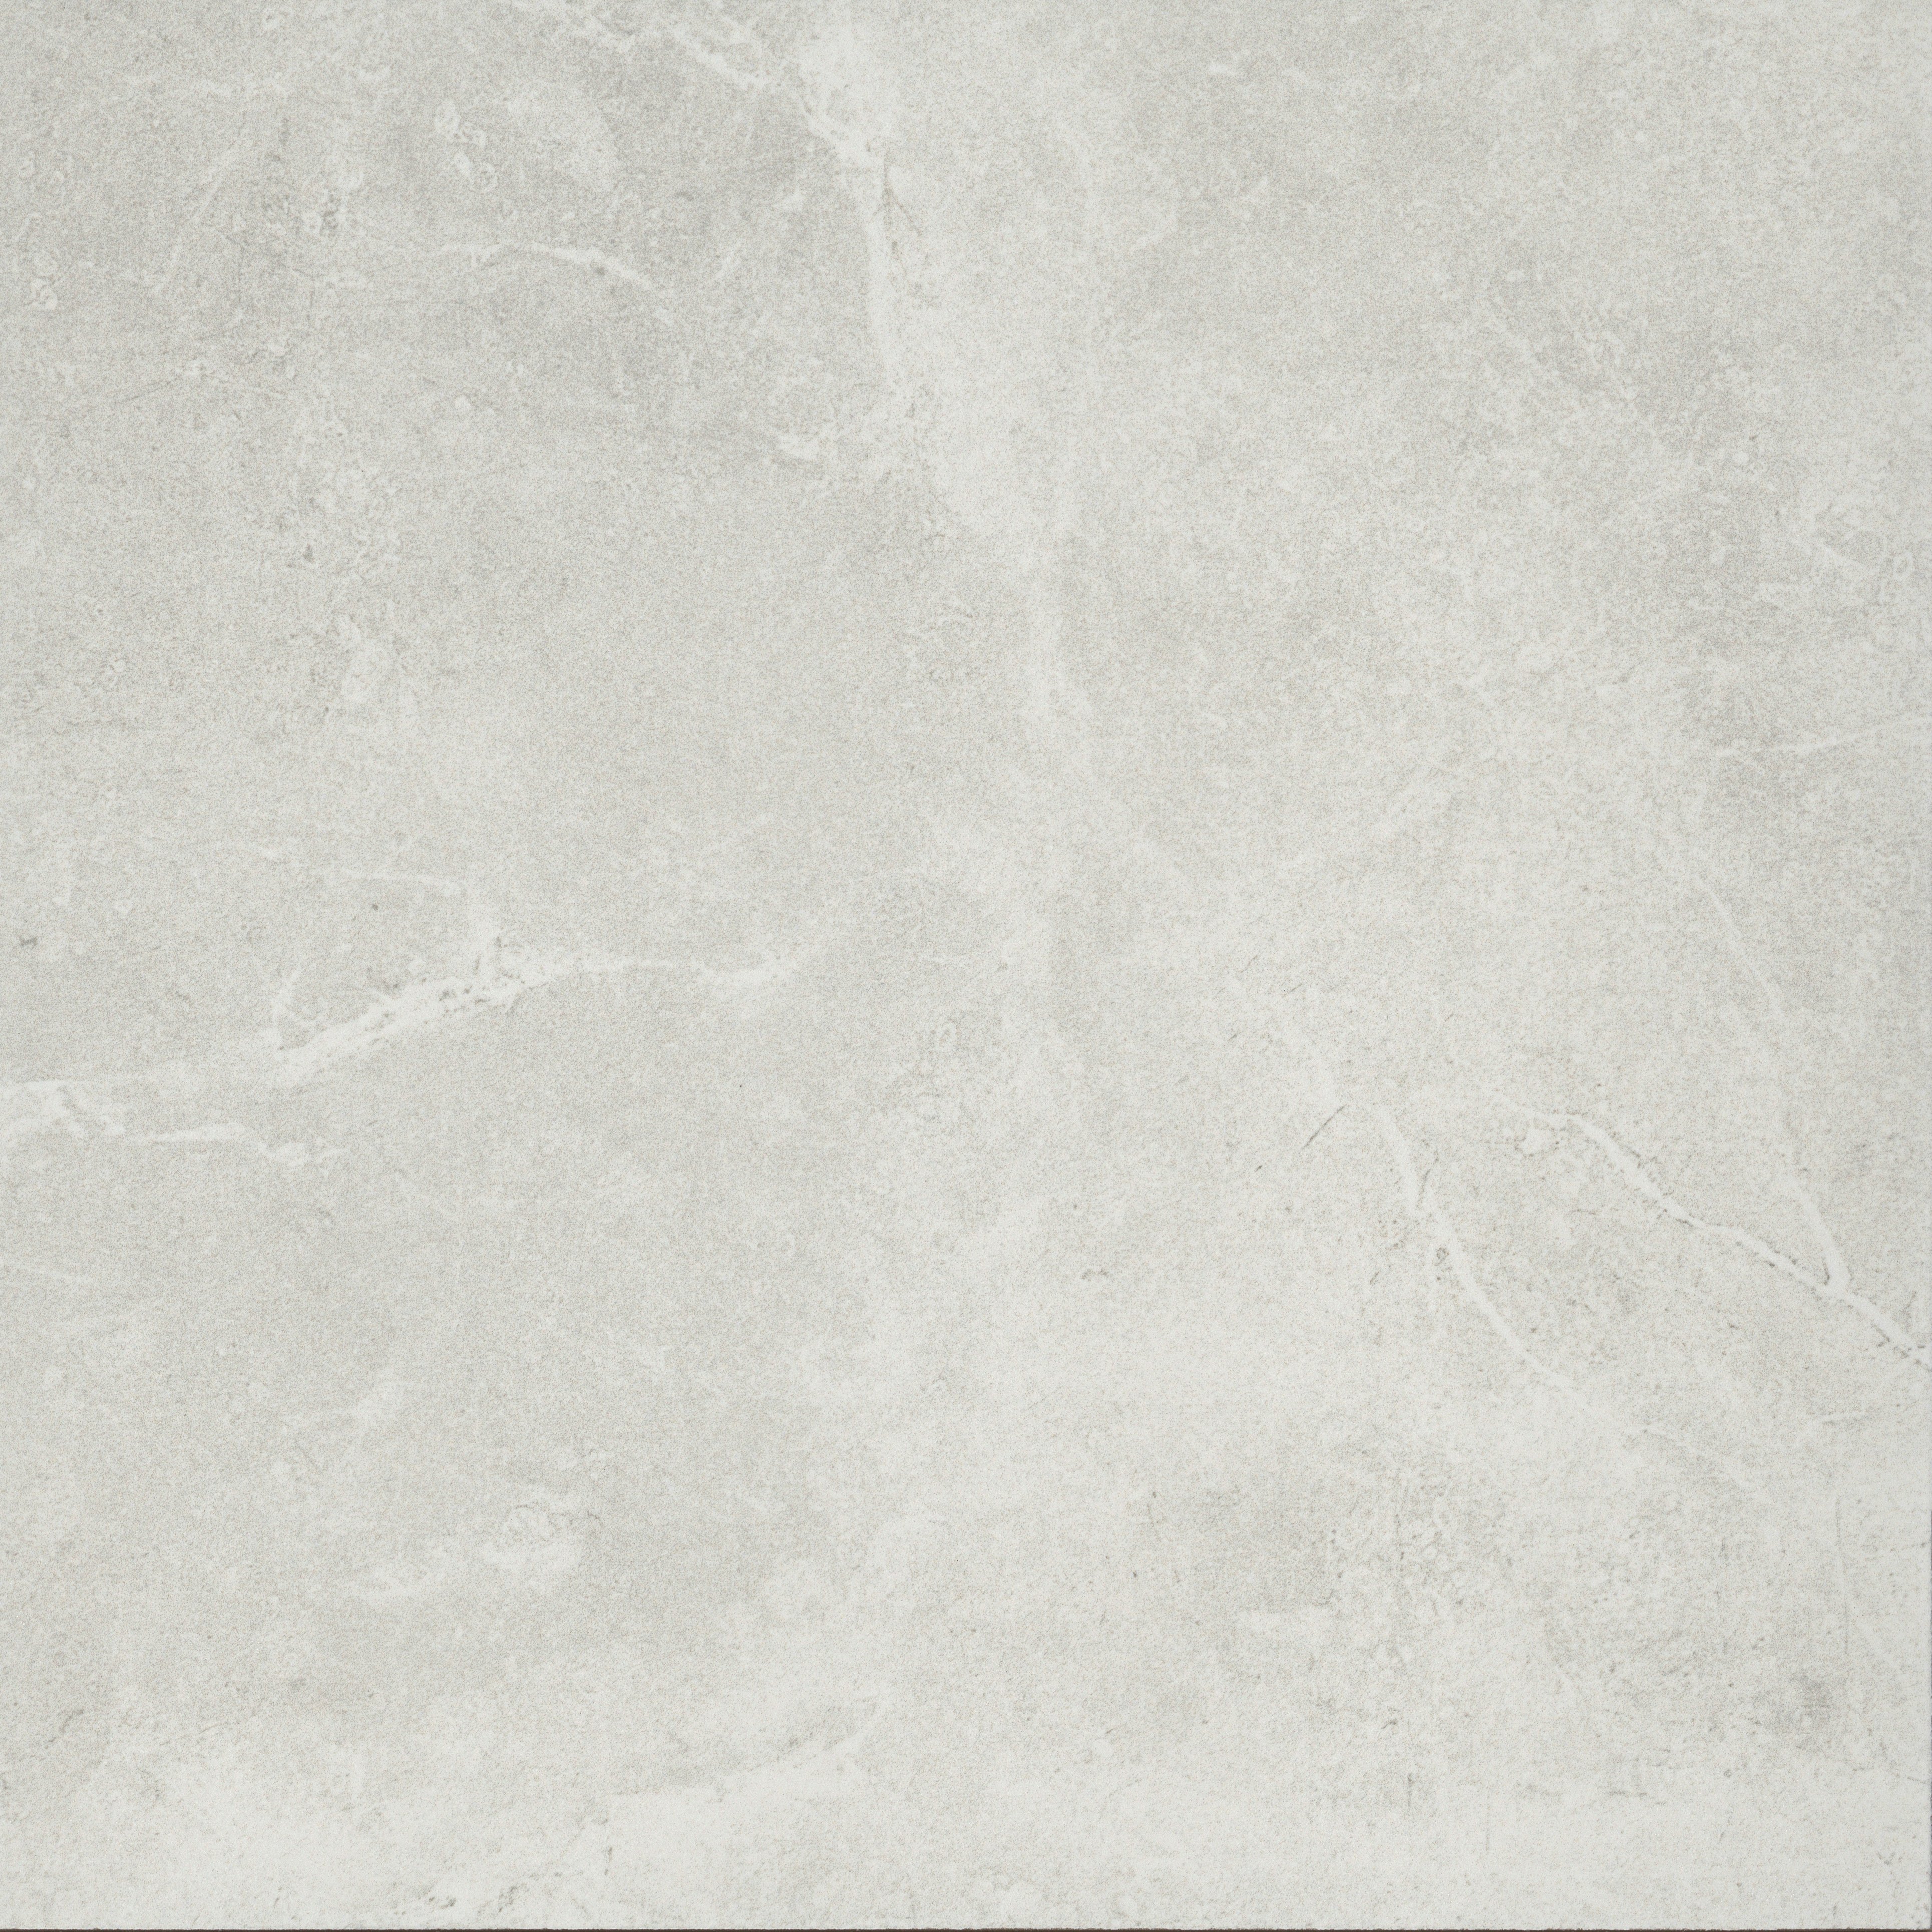 Realm District II glazed porcelain floor and wall tile available in 13x13, 18x18, 12x24, 3x13 SBN surface bullnose tile and 2x2 mosaic tile  Emser Tile 